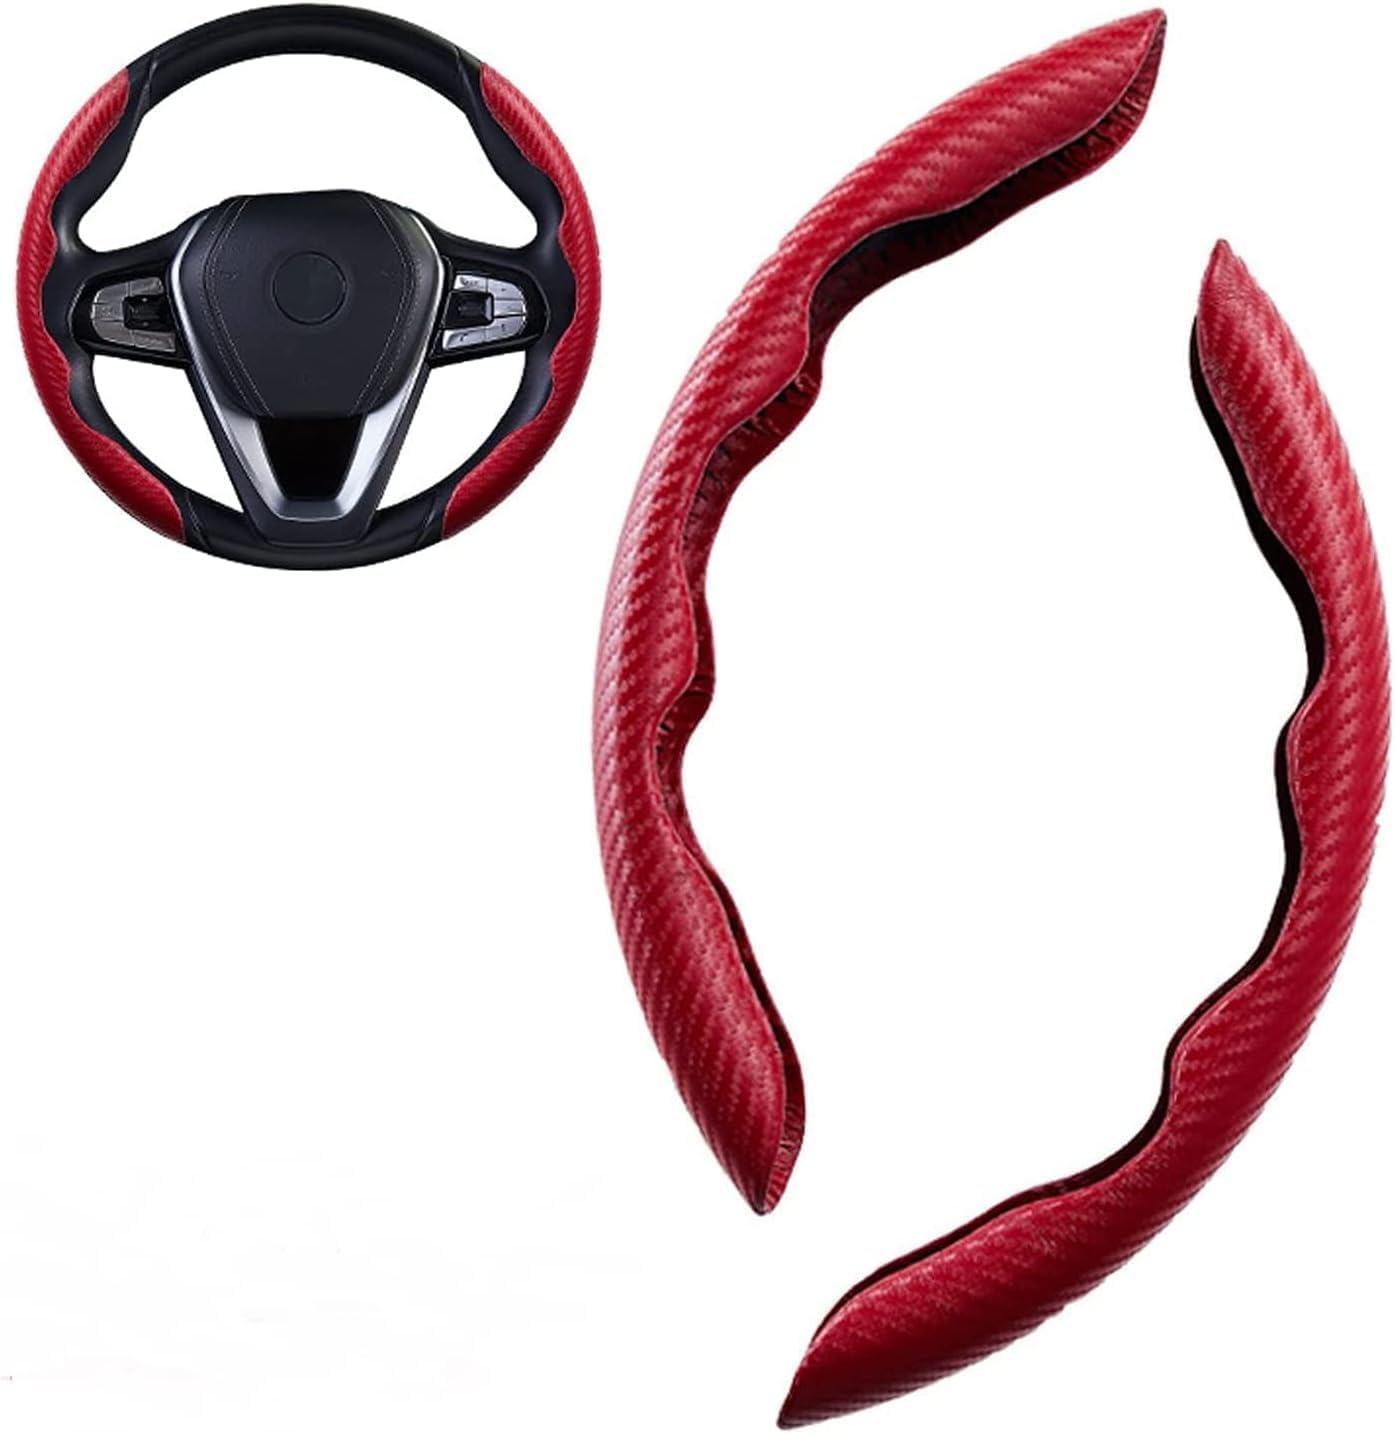 Pack of 2 Car Steering Wheel Cover for BMW M Sport F30 F31 F34 X1 F07 F10 F11 X2 F25 F32 F33 F36 F39 X3 F48,Non-Slip Wear-Resistant Carbon Fibre Steering Wheel Protector,B-Red von INGKE